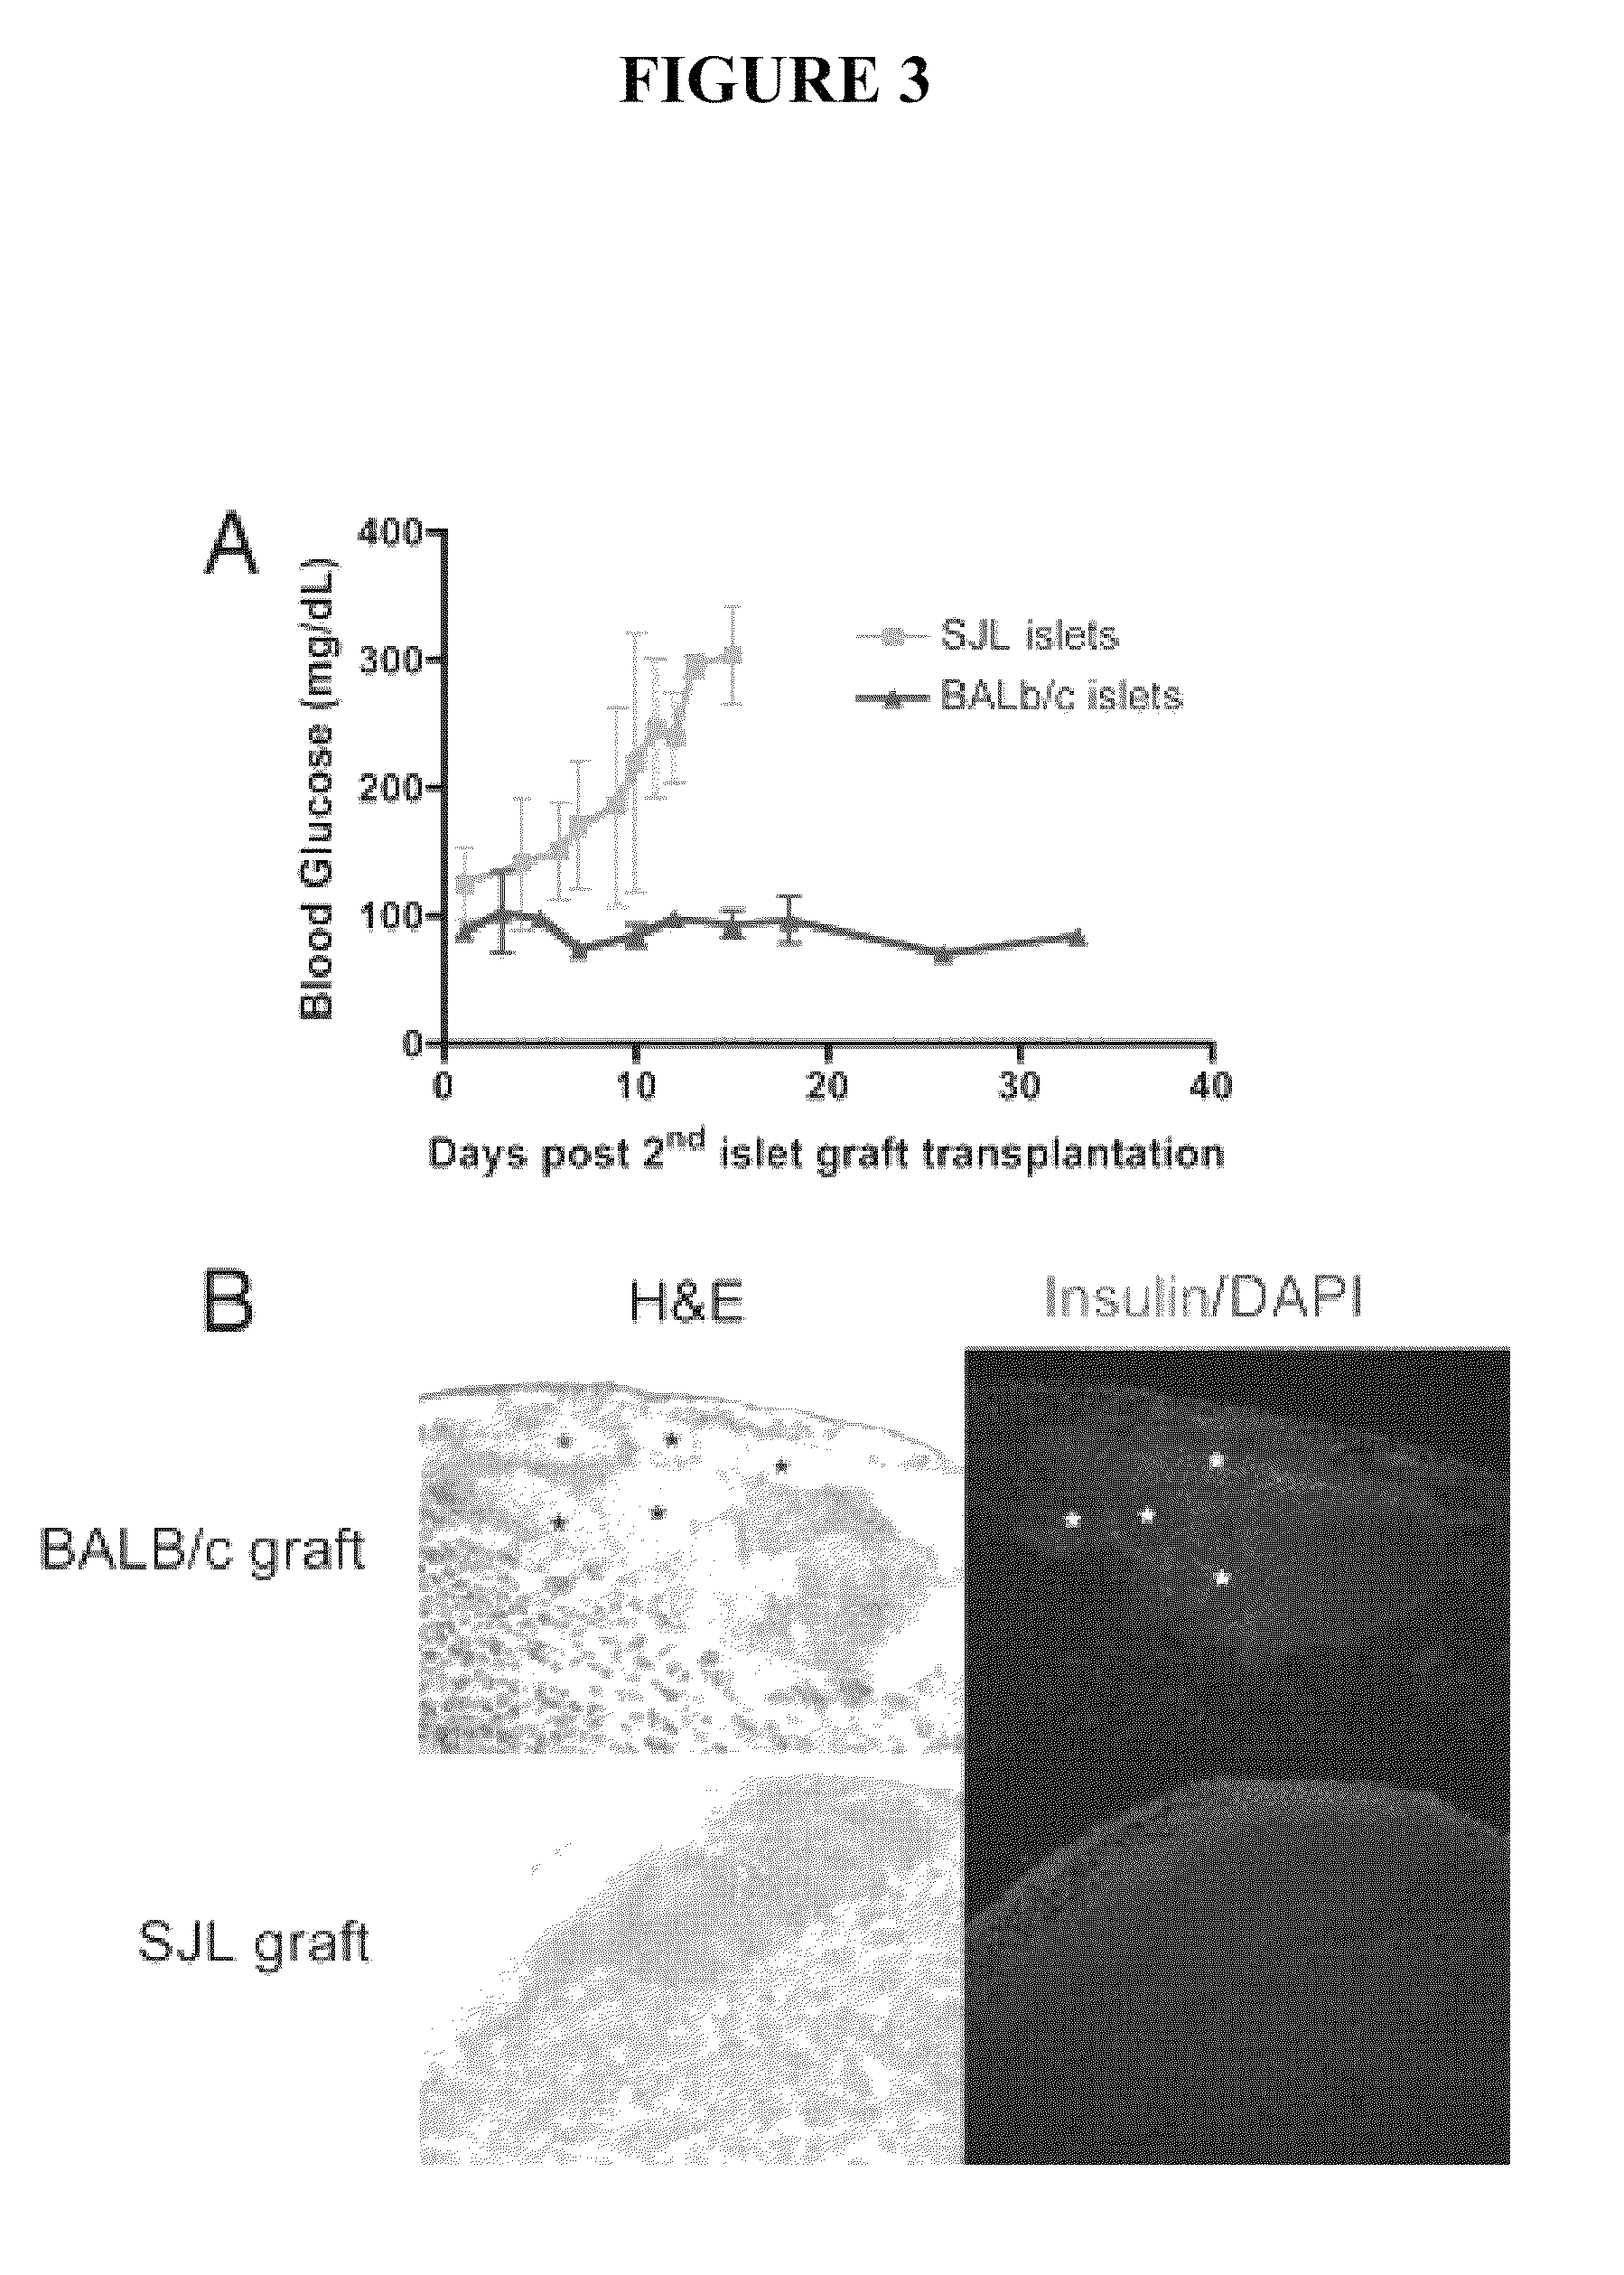 Use of ECDI-fixed cell tolerance as a method for preventing allograft rejection